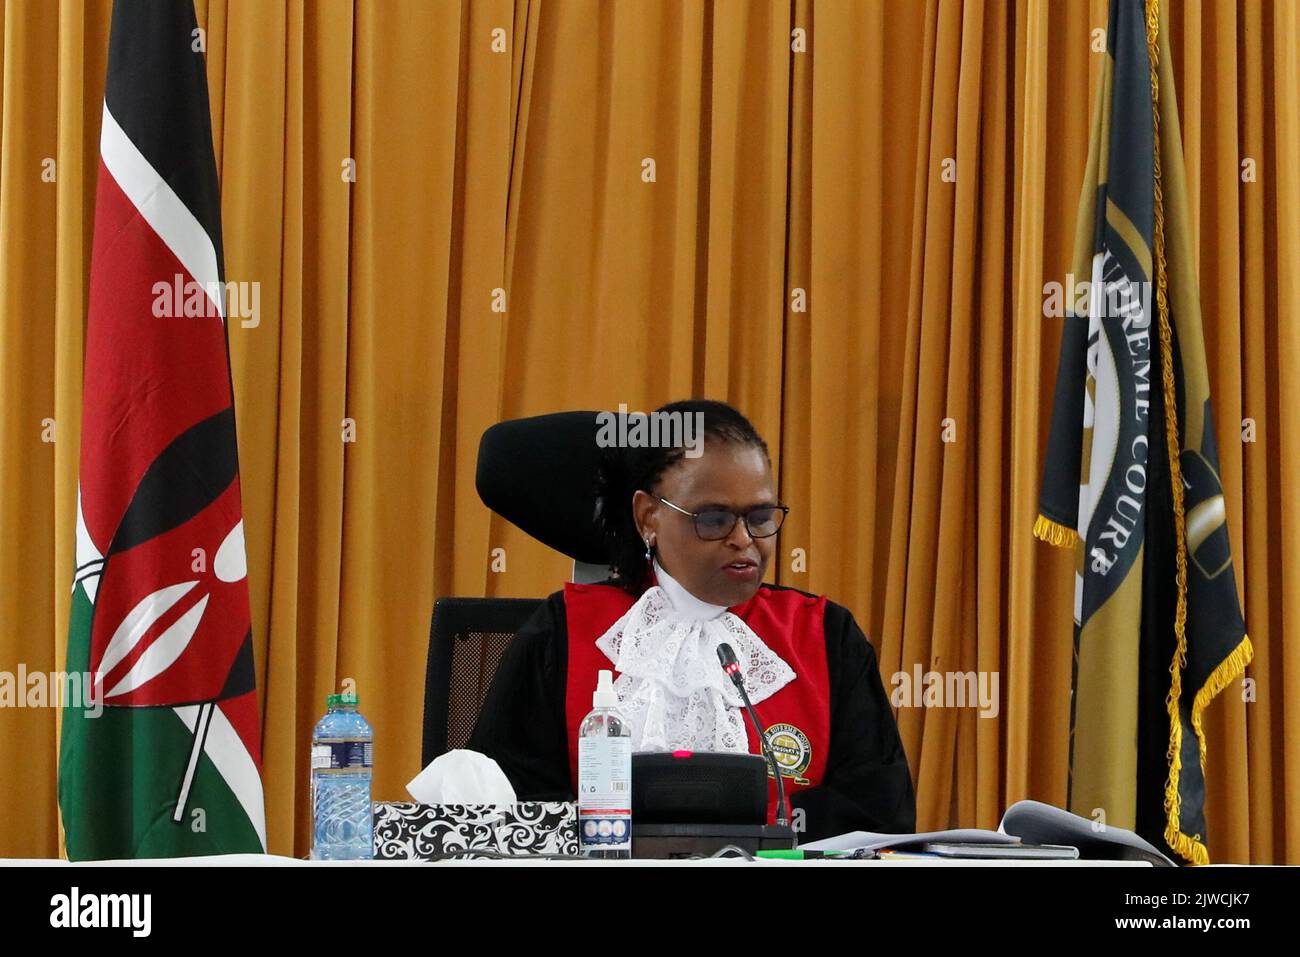 Kenya's Supreme Court Chief Justice Martha Koome presides to deliver the ruling on a petition seeking to invalidate the outcome of the recent presidential election, at the Supreme Court in Nairobi, Kenya September 5, 2022. REUTERS/Thomas Mukoya Stock Photo